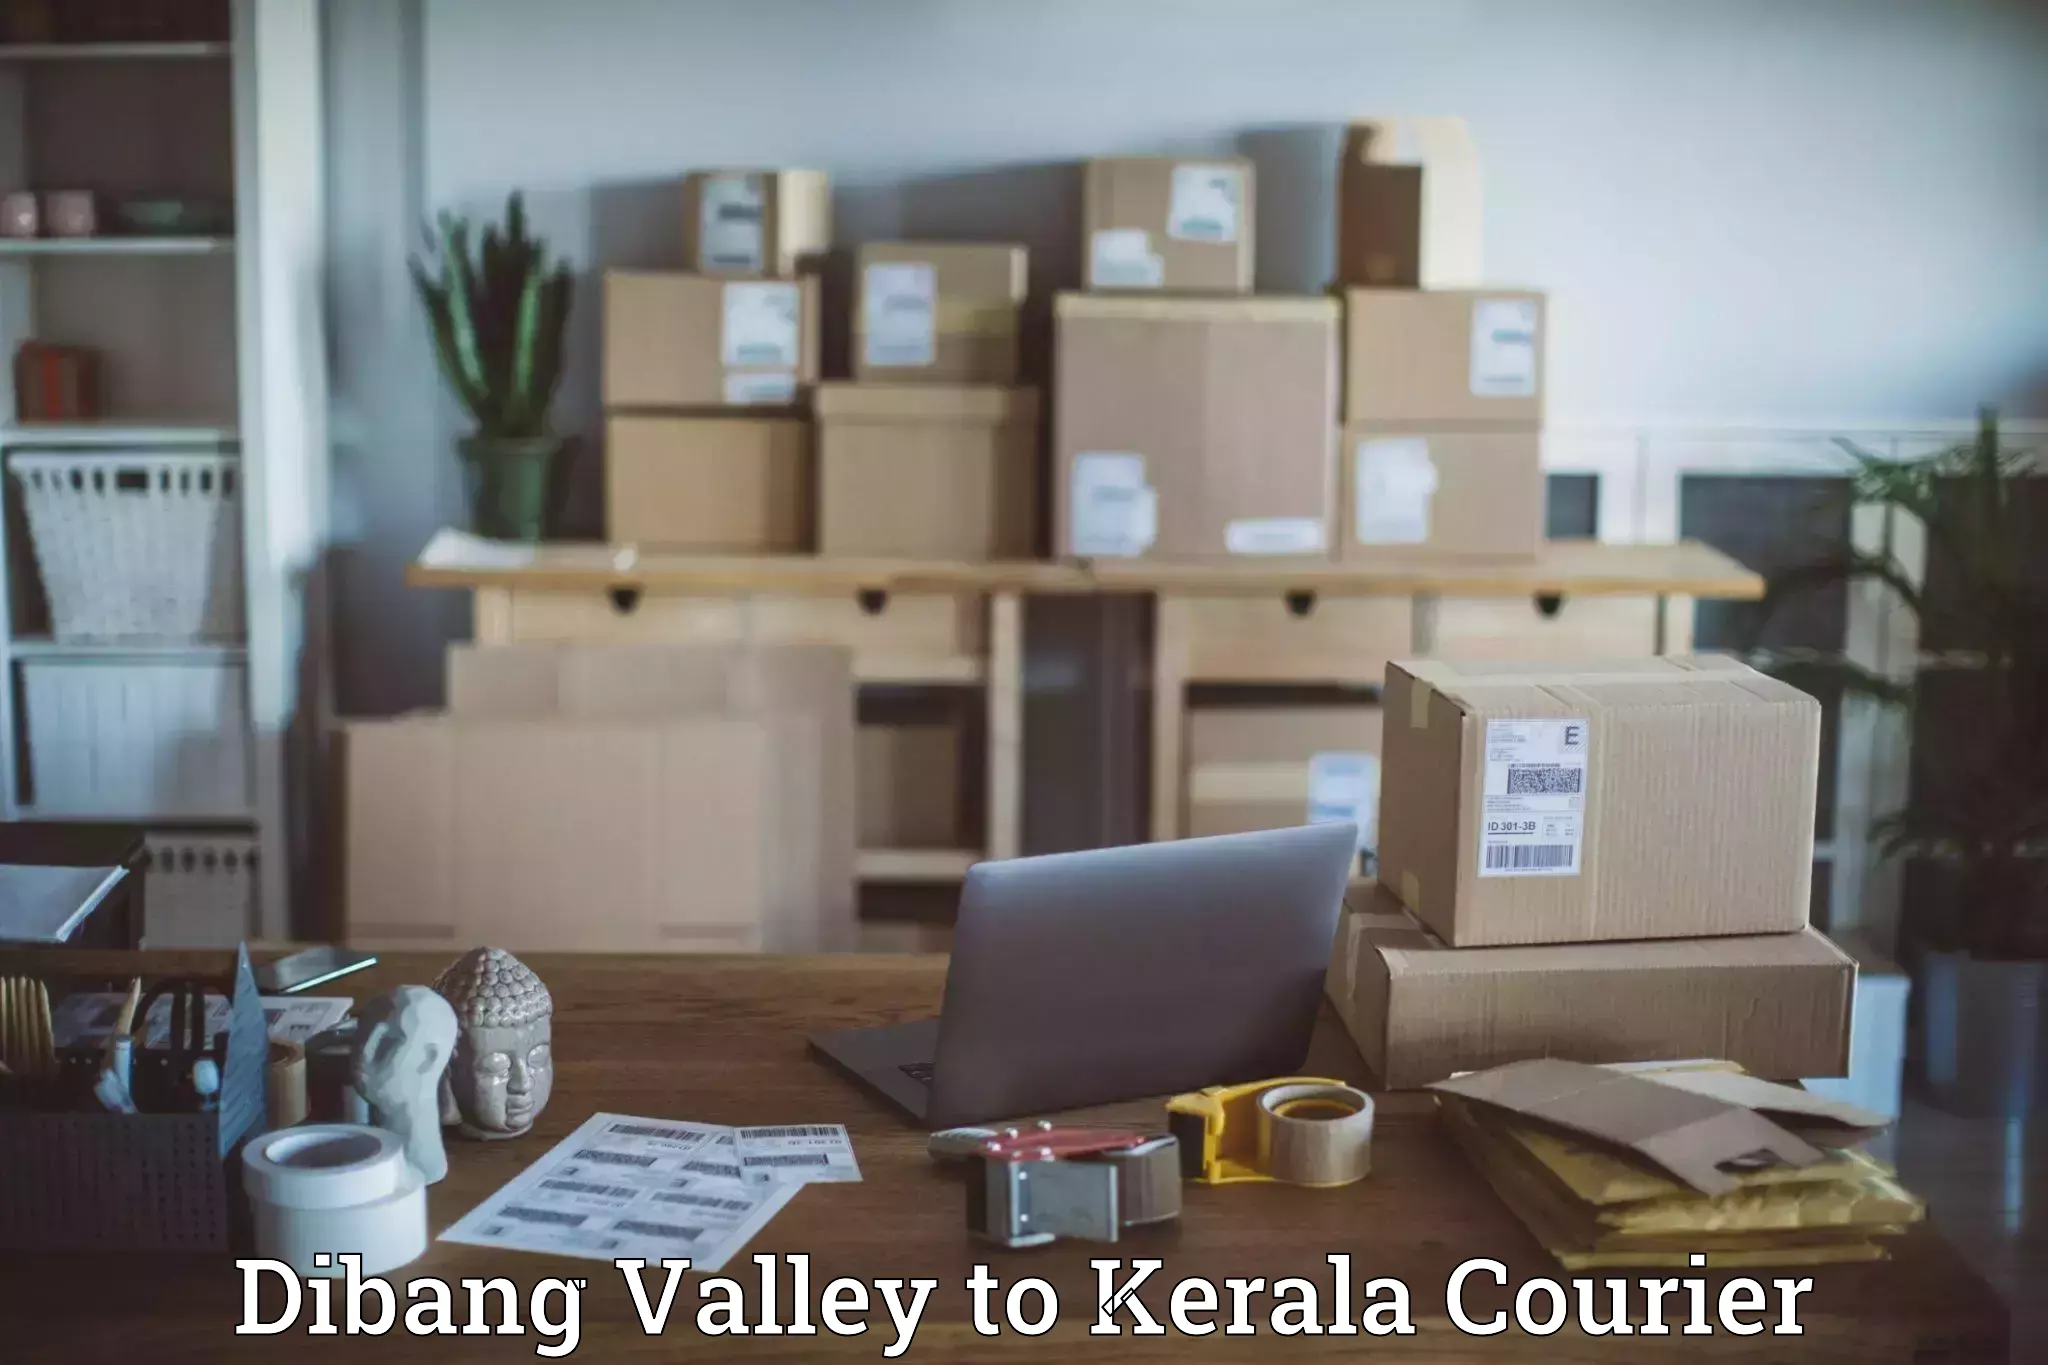 Sustainable delivery practices Dibang Valley to Alathur Malabar